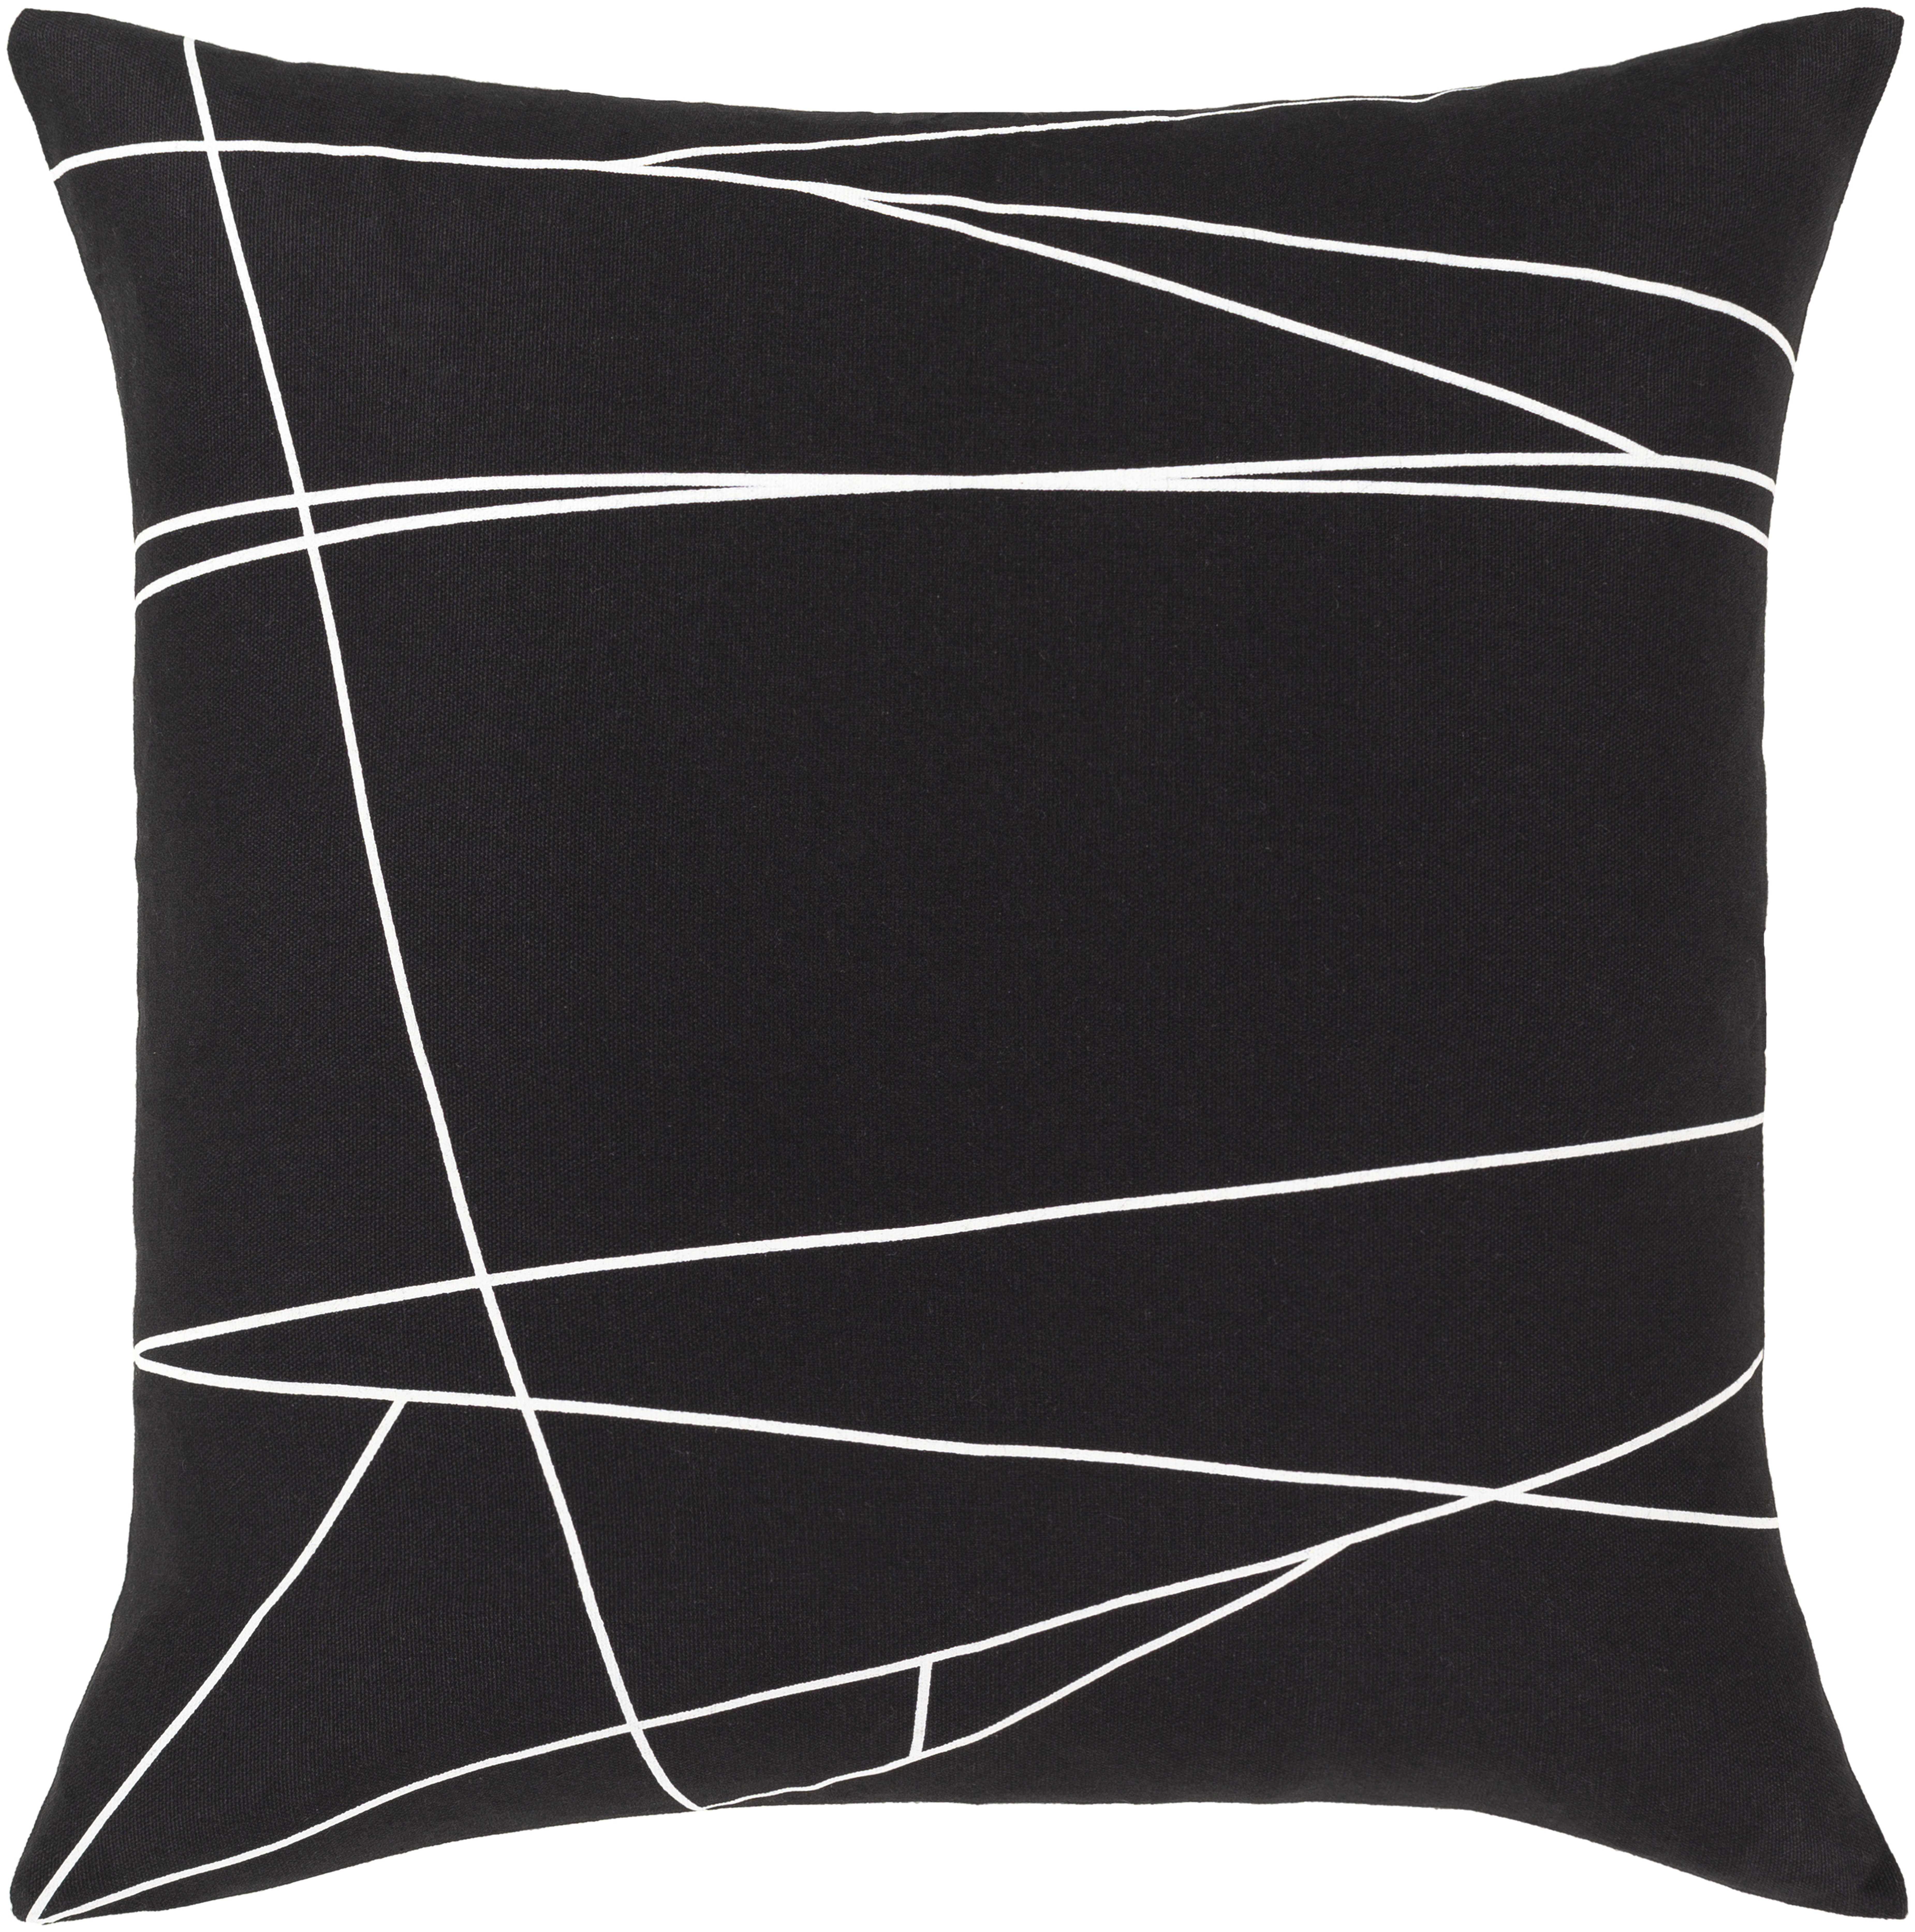 Graphic Punch - GPC-004 - 18" x 18" - pillow cover only - Surya